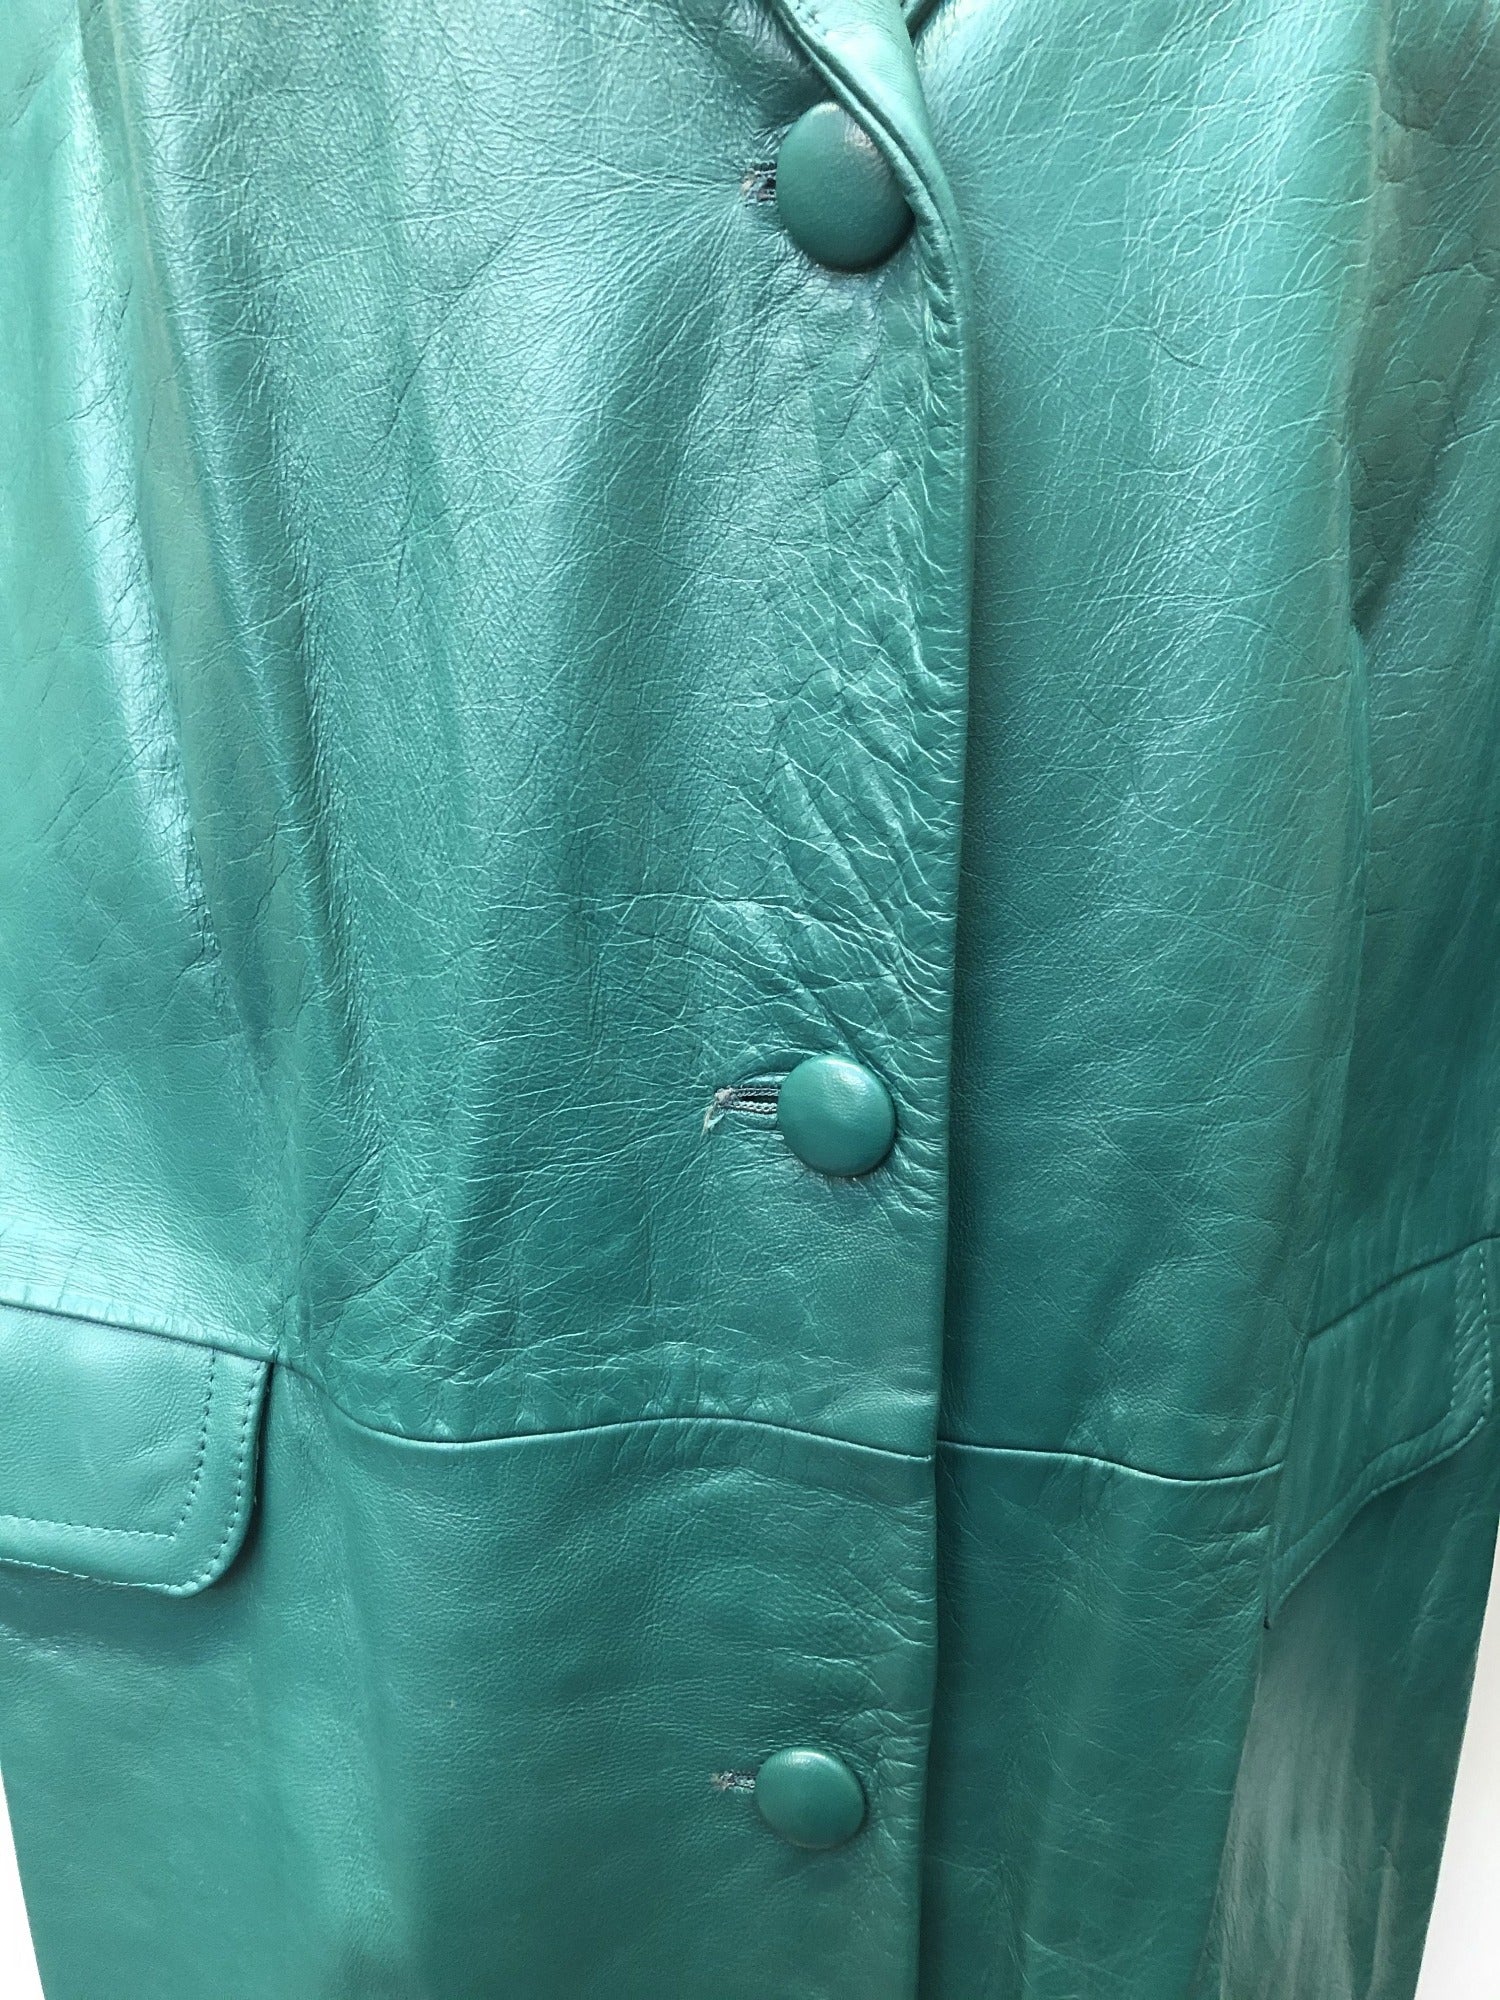 1960s Paul Blanche Leather Coat womens green MOD 60s loose fit coat Size 12 Viintage womens clothing Urban Village Vintage